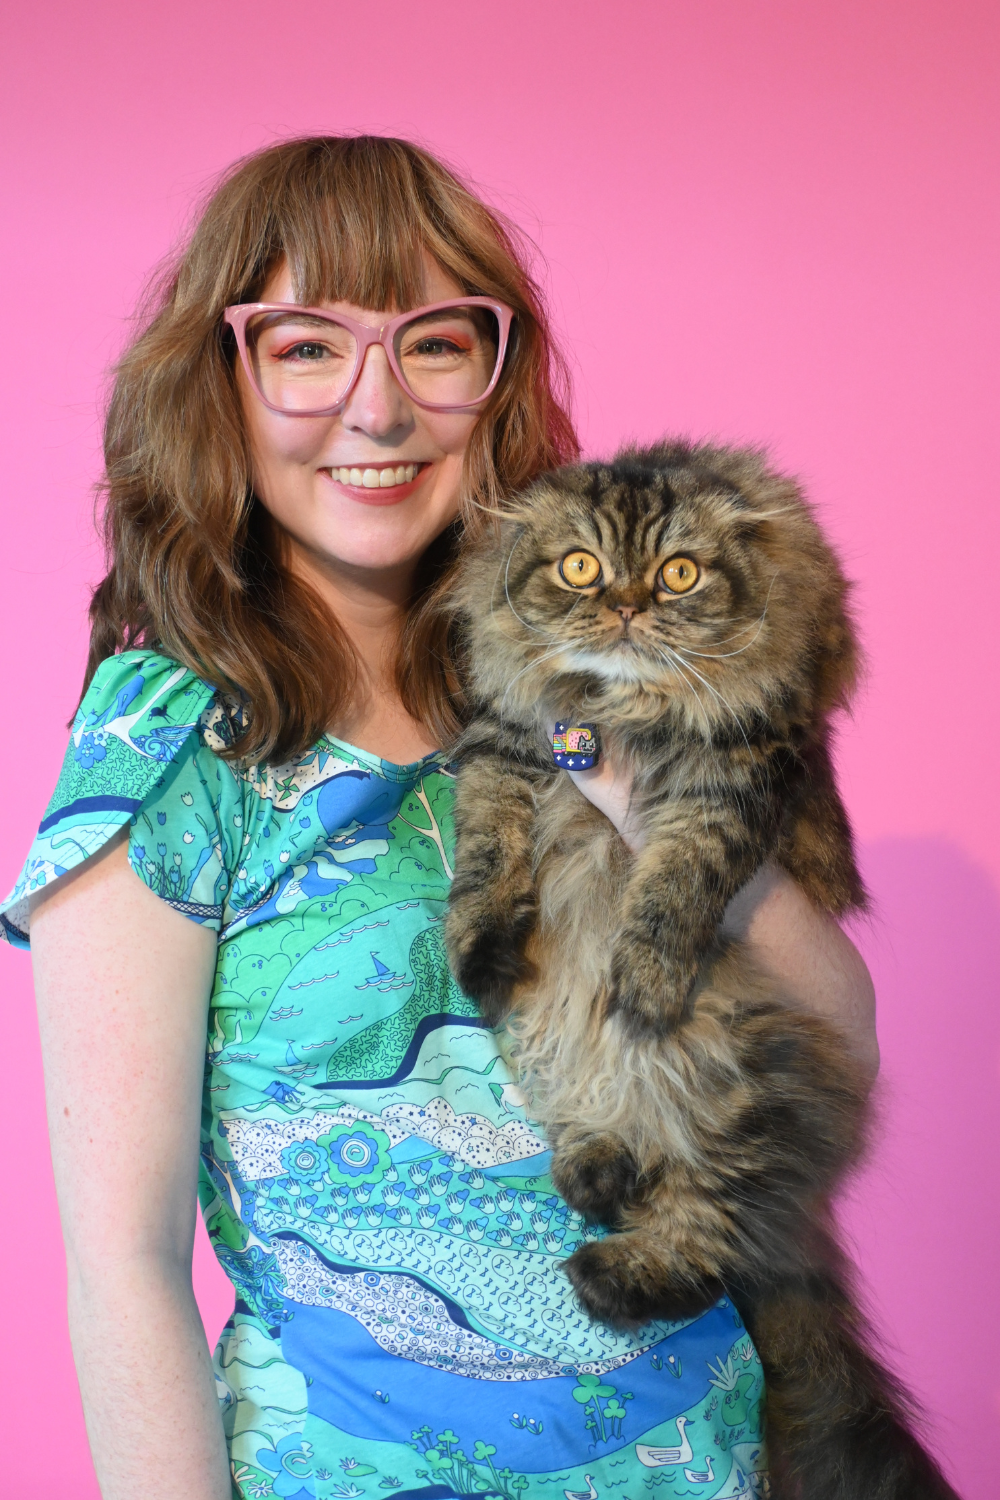 Model wearing glasses and holding cat wearing shirt with landscape graphic in green and blue